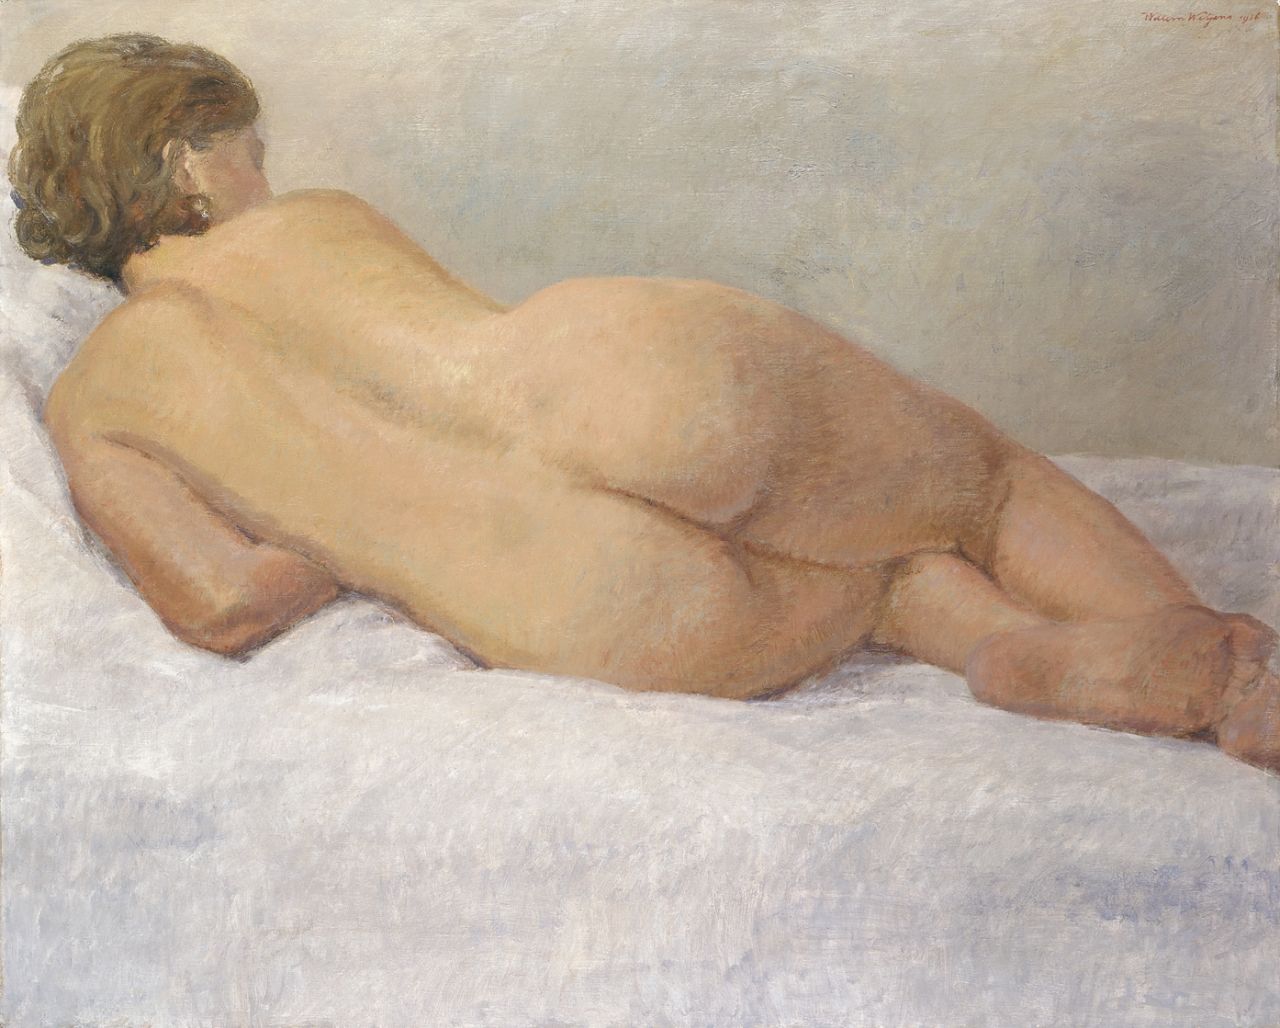 Witjens J.W.H.  | Jan 'Willem' Hendrik  Witjens, A reclining nude, oil on canvas 96.5 x 120.0 cm, signed u.r. and dated 1936